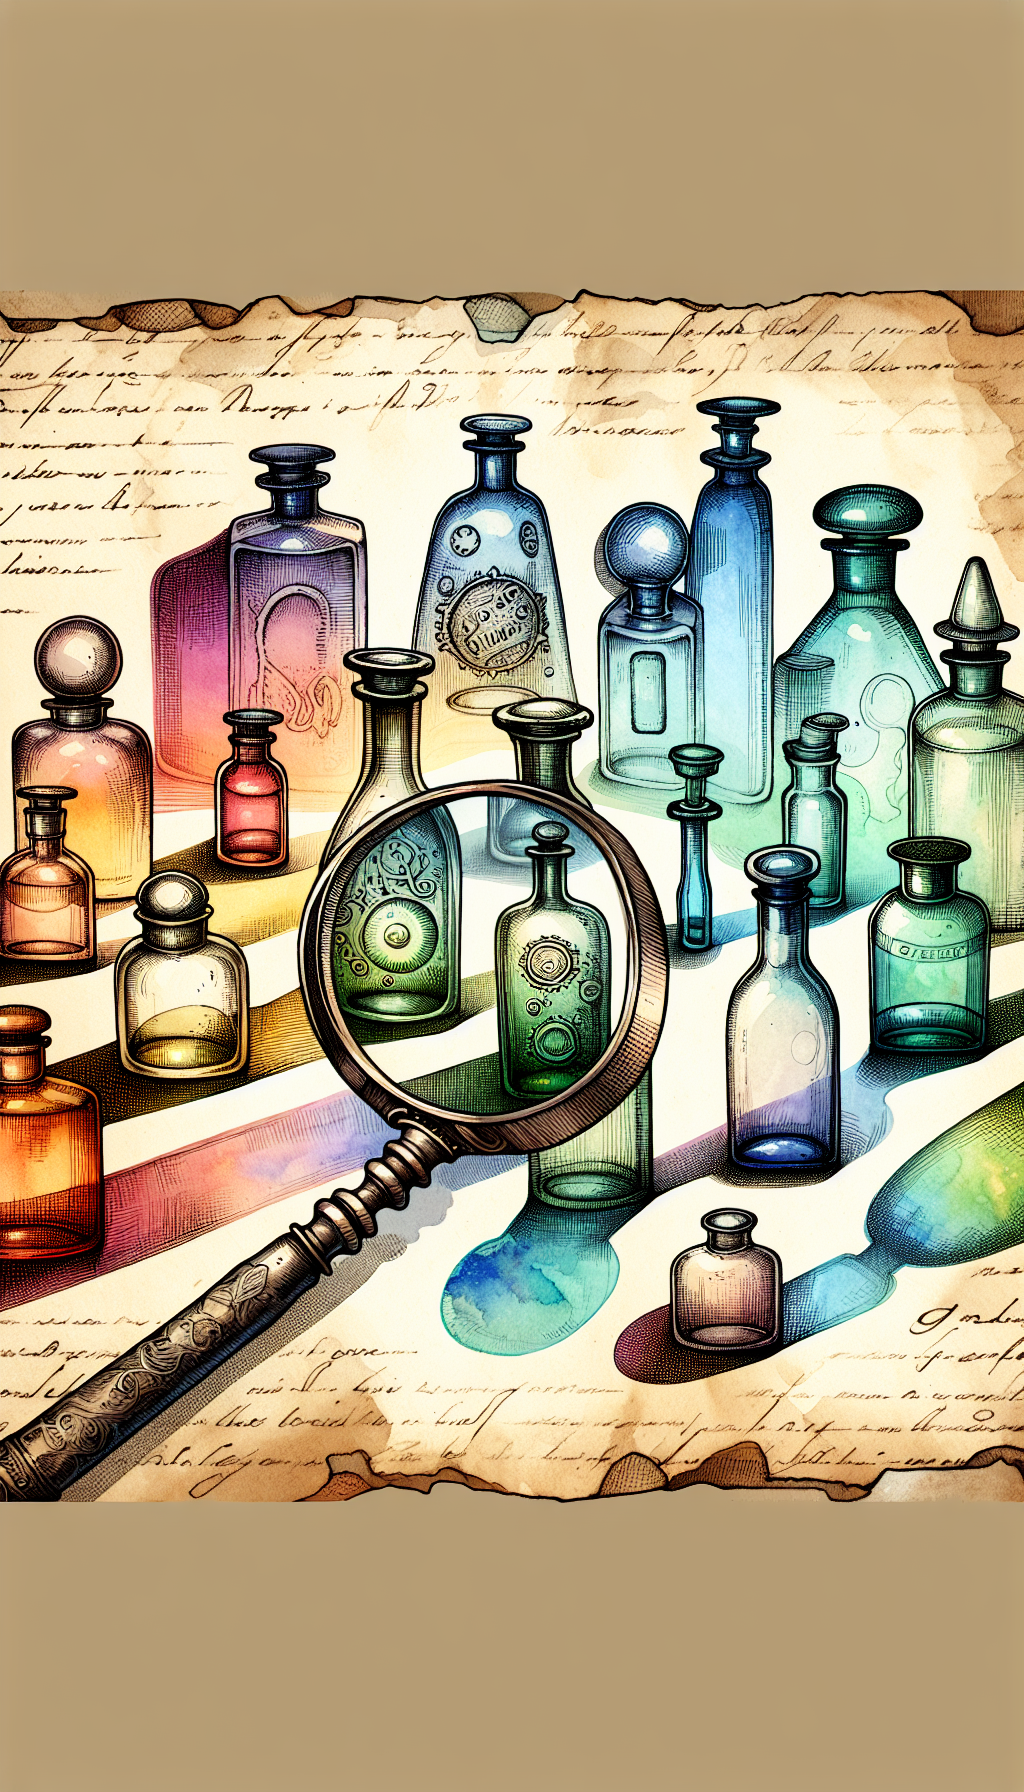 A whimsically arranged cluster of translucent glass bottles of varying shapes and eras, with a magnifying glass focusing on a distinct bottle, highlighting the embossed markings and date. The bottles, tinted in subtle hues, cast colorful shadows on an ancient-looking parchment labeled "Time Capsules in Glass," blending line art, watercolor washes, and stippling for texture and depth.